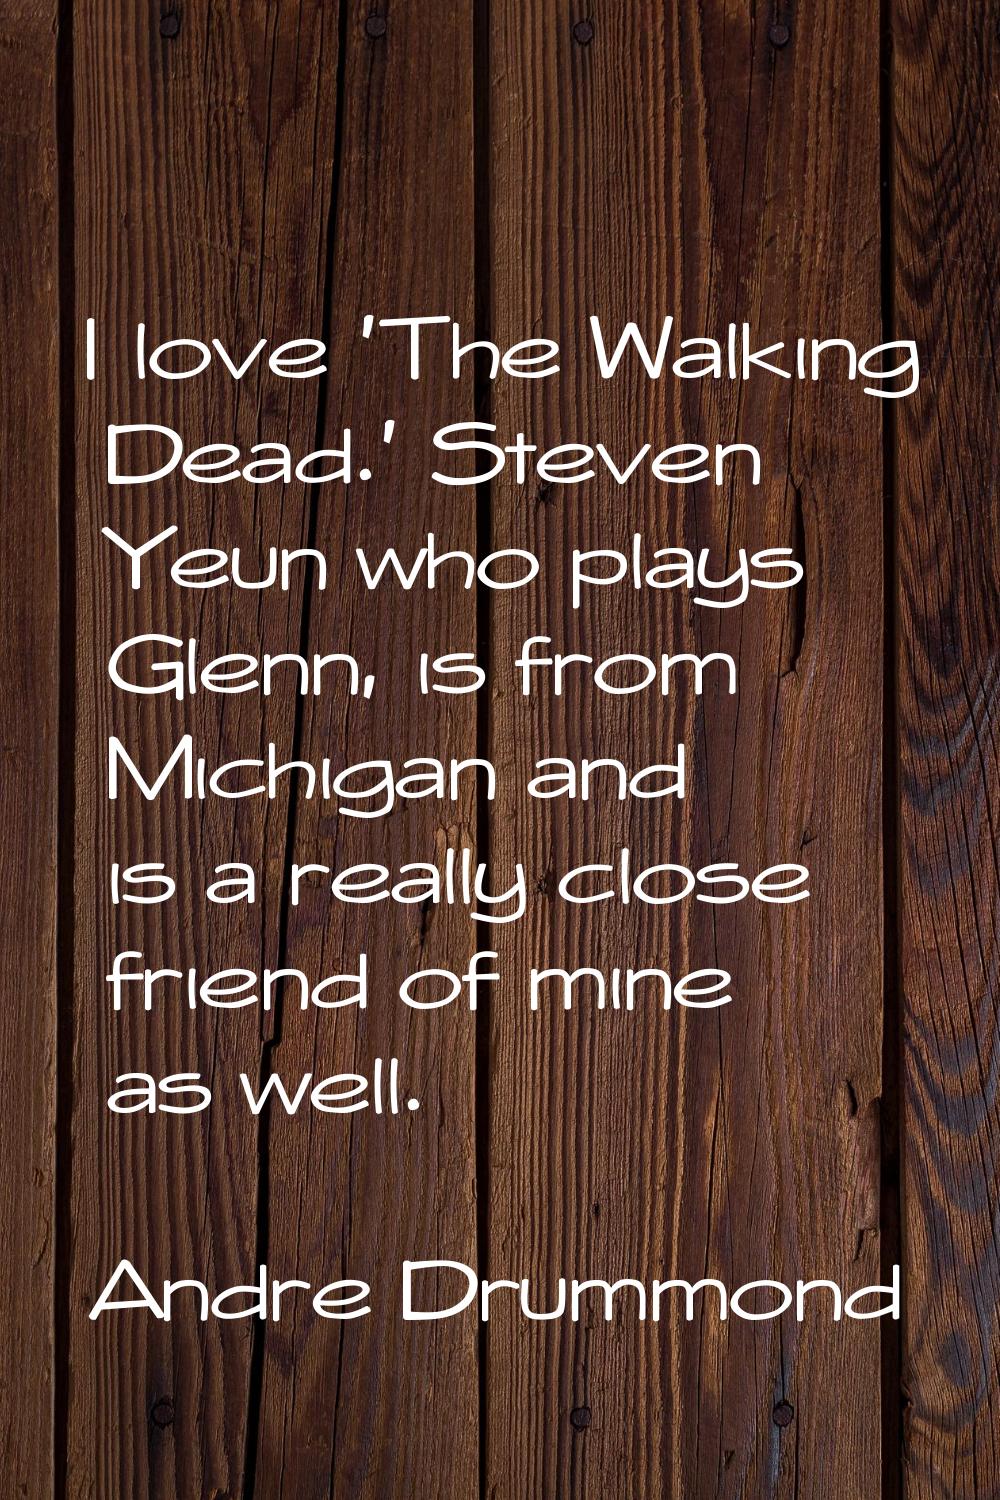 I love 'The Walking Dead.' Steven Yeun who plays Glenn, is from Michigan and is a really close frie